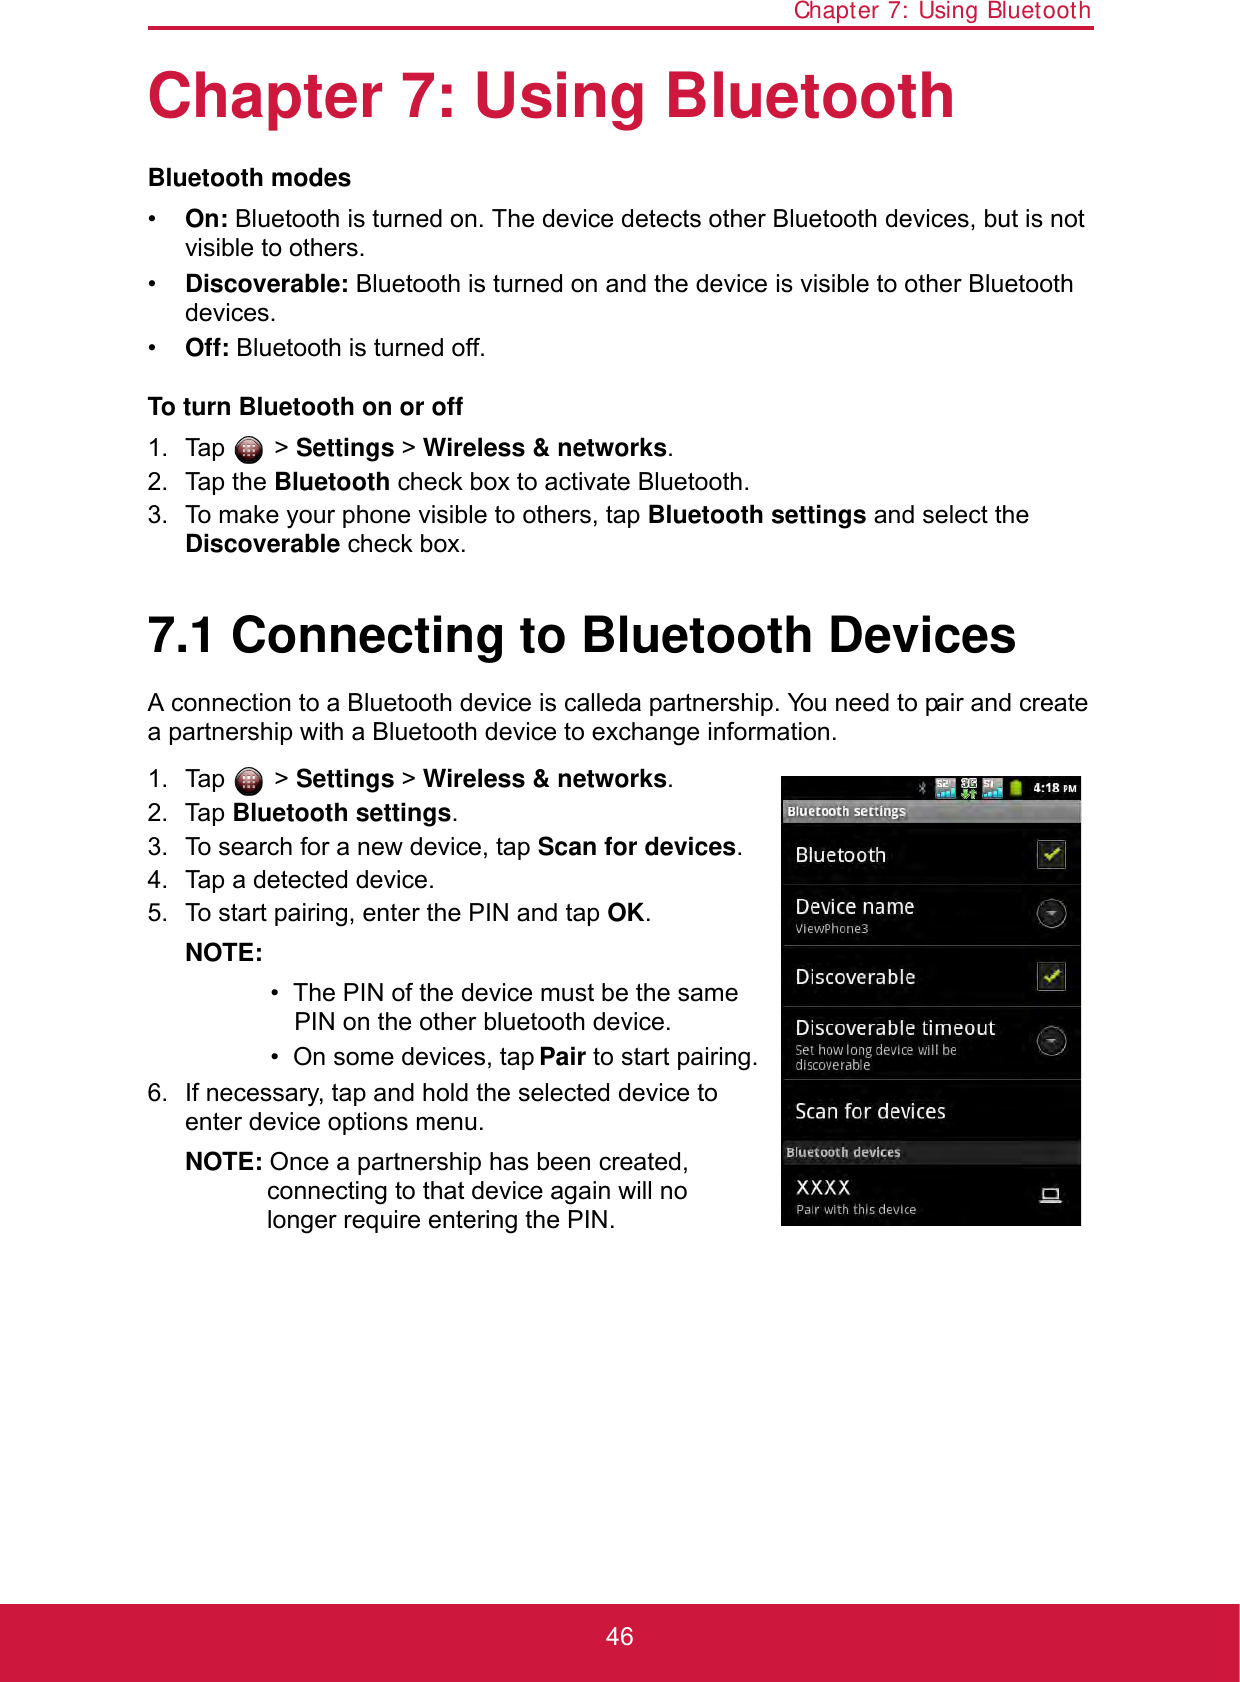 Chapter 7: Using Bluetooth46Chapter 7: Using BluetoothBluetooth modes•On: Bluetooth is turned on. The device detects other Bluetooth devices, but is not visible to others.•Discoverable: Bluetooth is turned on and the device is visible to other Bluetooth devices.•Off: Bluetooth is turned off.To turn Bluetooth on or off1. Tap  &gt; Settings &gt; Wireless &amp; networks.2. Tap the Bluetooth check box to activate Bluetooth.3. To make your phone visible to others, tap Bluetooth settings and select the Discoverable check box.7.1 Connecting to Bluetooth DevicesA connection to a Bluetooth device is called a partnership. You need to pair and create a partnership with a Bluetooth device to exchange information.1. Tap  &gt; Settings &gt; Wireless &amp; networks.2. Tap Bluetooth settings. 3. To search for a new device, tap Scan for devices.4. Tap a detected device.5. To start pairing, enter the PIN and tap OK.NOTE: •  The PIN of the device must be the same PIN on the other bluetooth device.•  On some devices, tap Pair to start pairing.6. If necessary, tap and hold the selected device to enter device options menu.NOTE: Once a partnership has been created, connecting to that device again will no longer require entering the PIN.